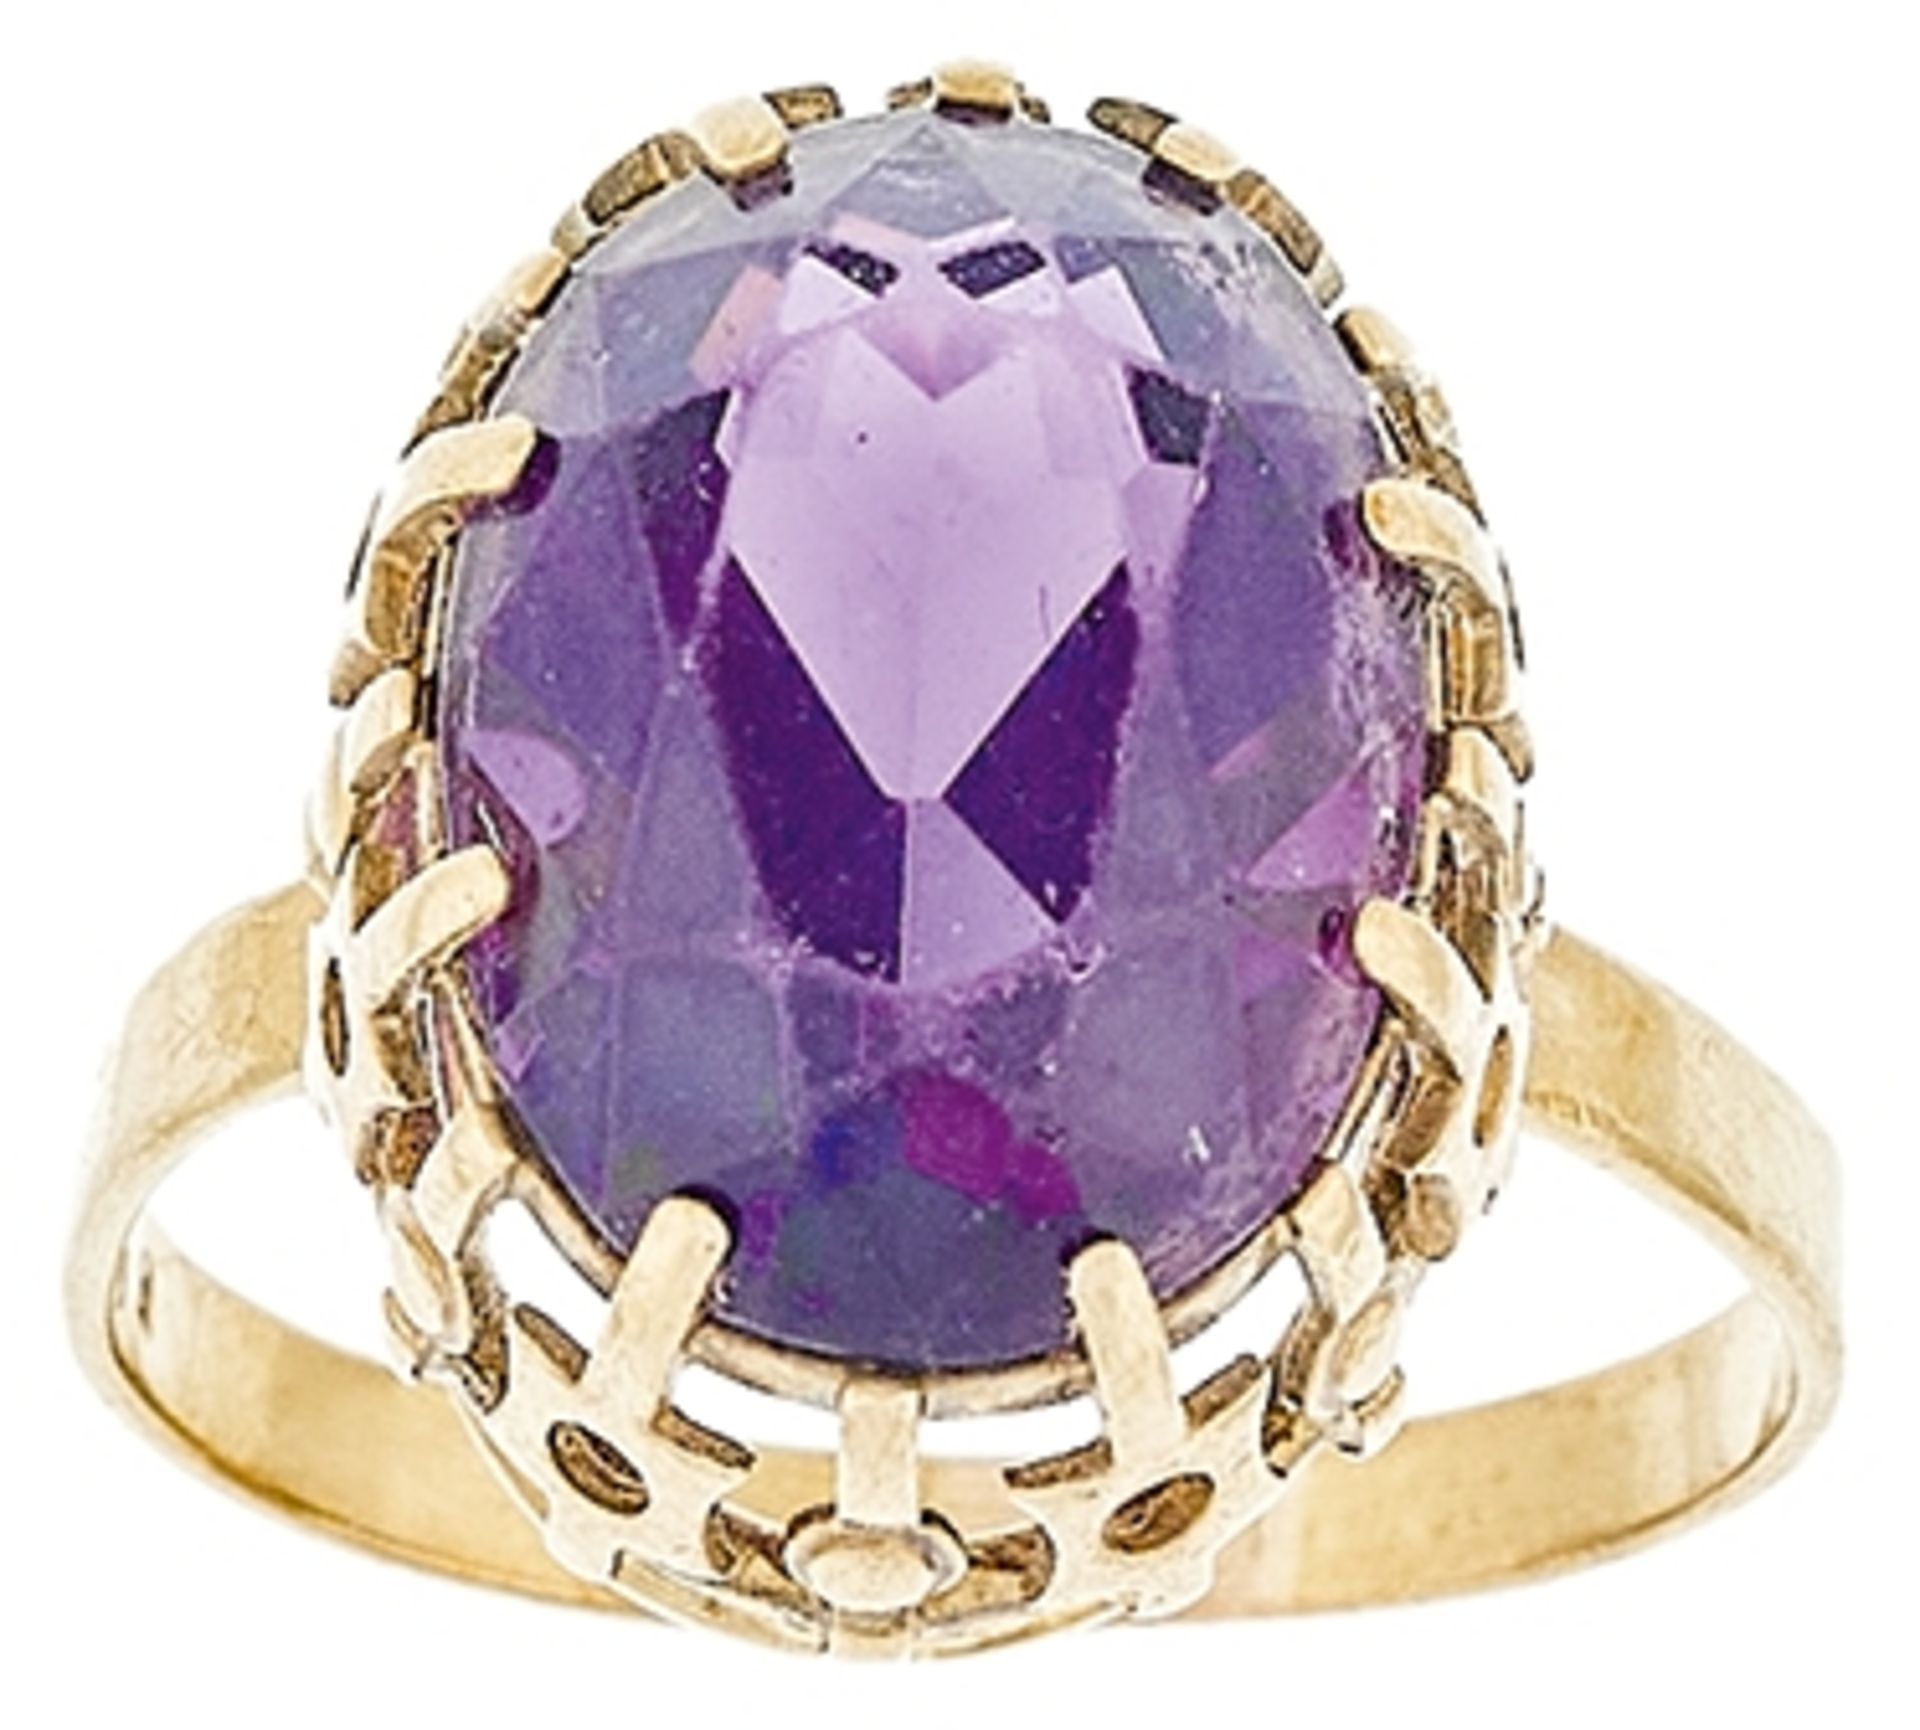 Opulently amethyst ring, Germany about 1950, 333 yellow gold used, further with masters hallmark \\